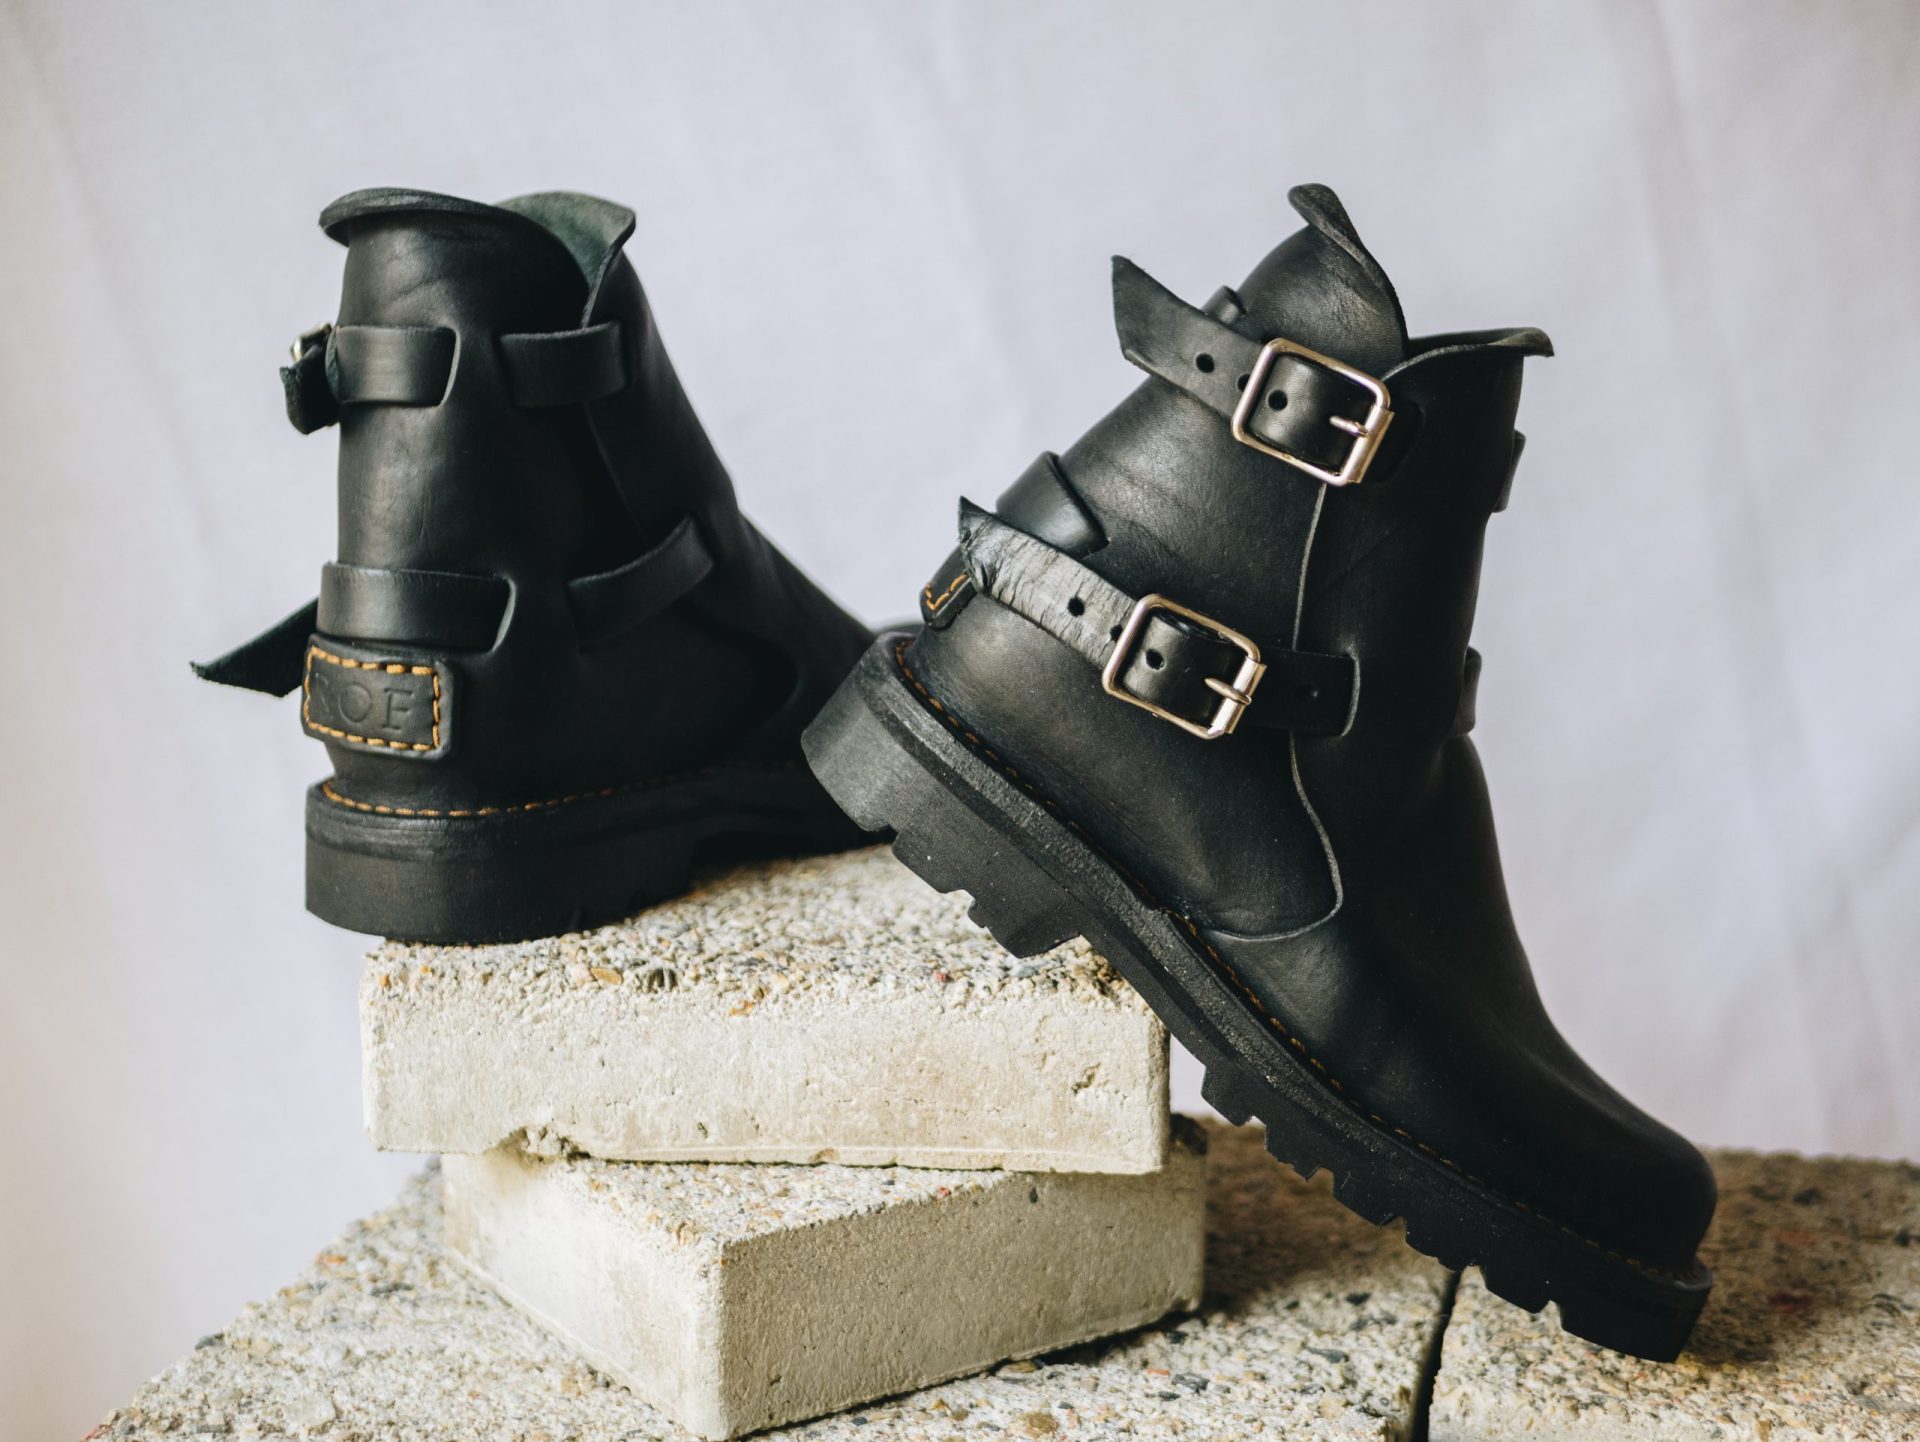 Rof-Style - Handmade Leather Boot from South Africa